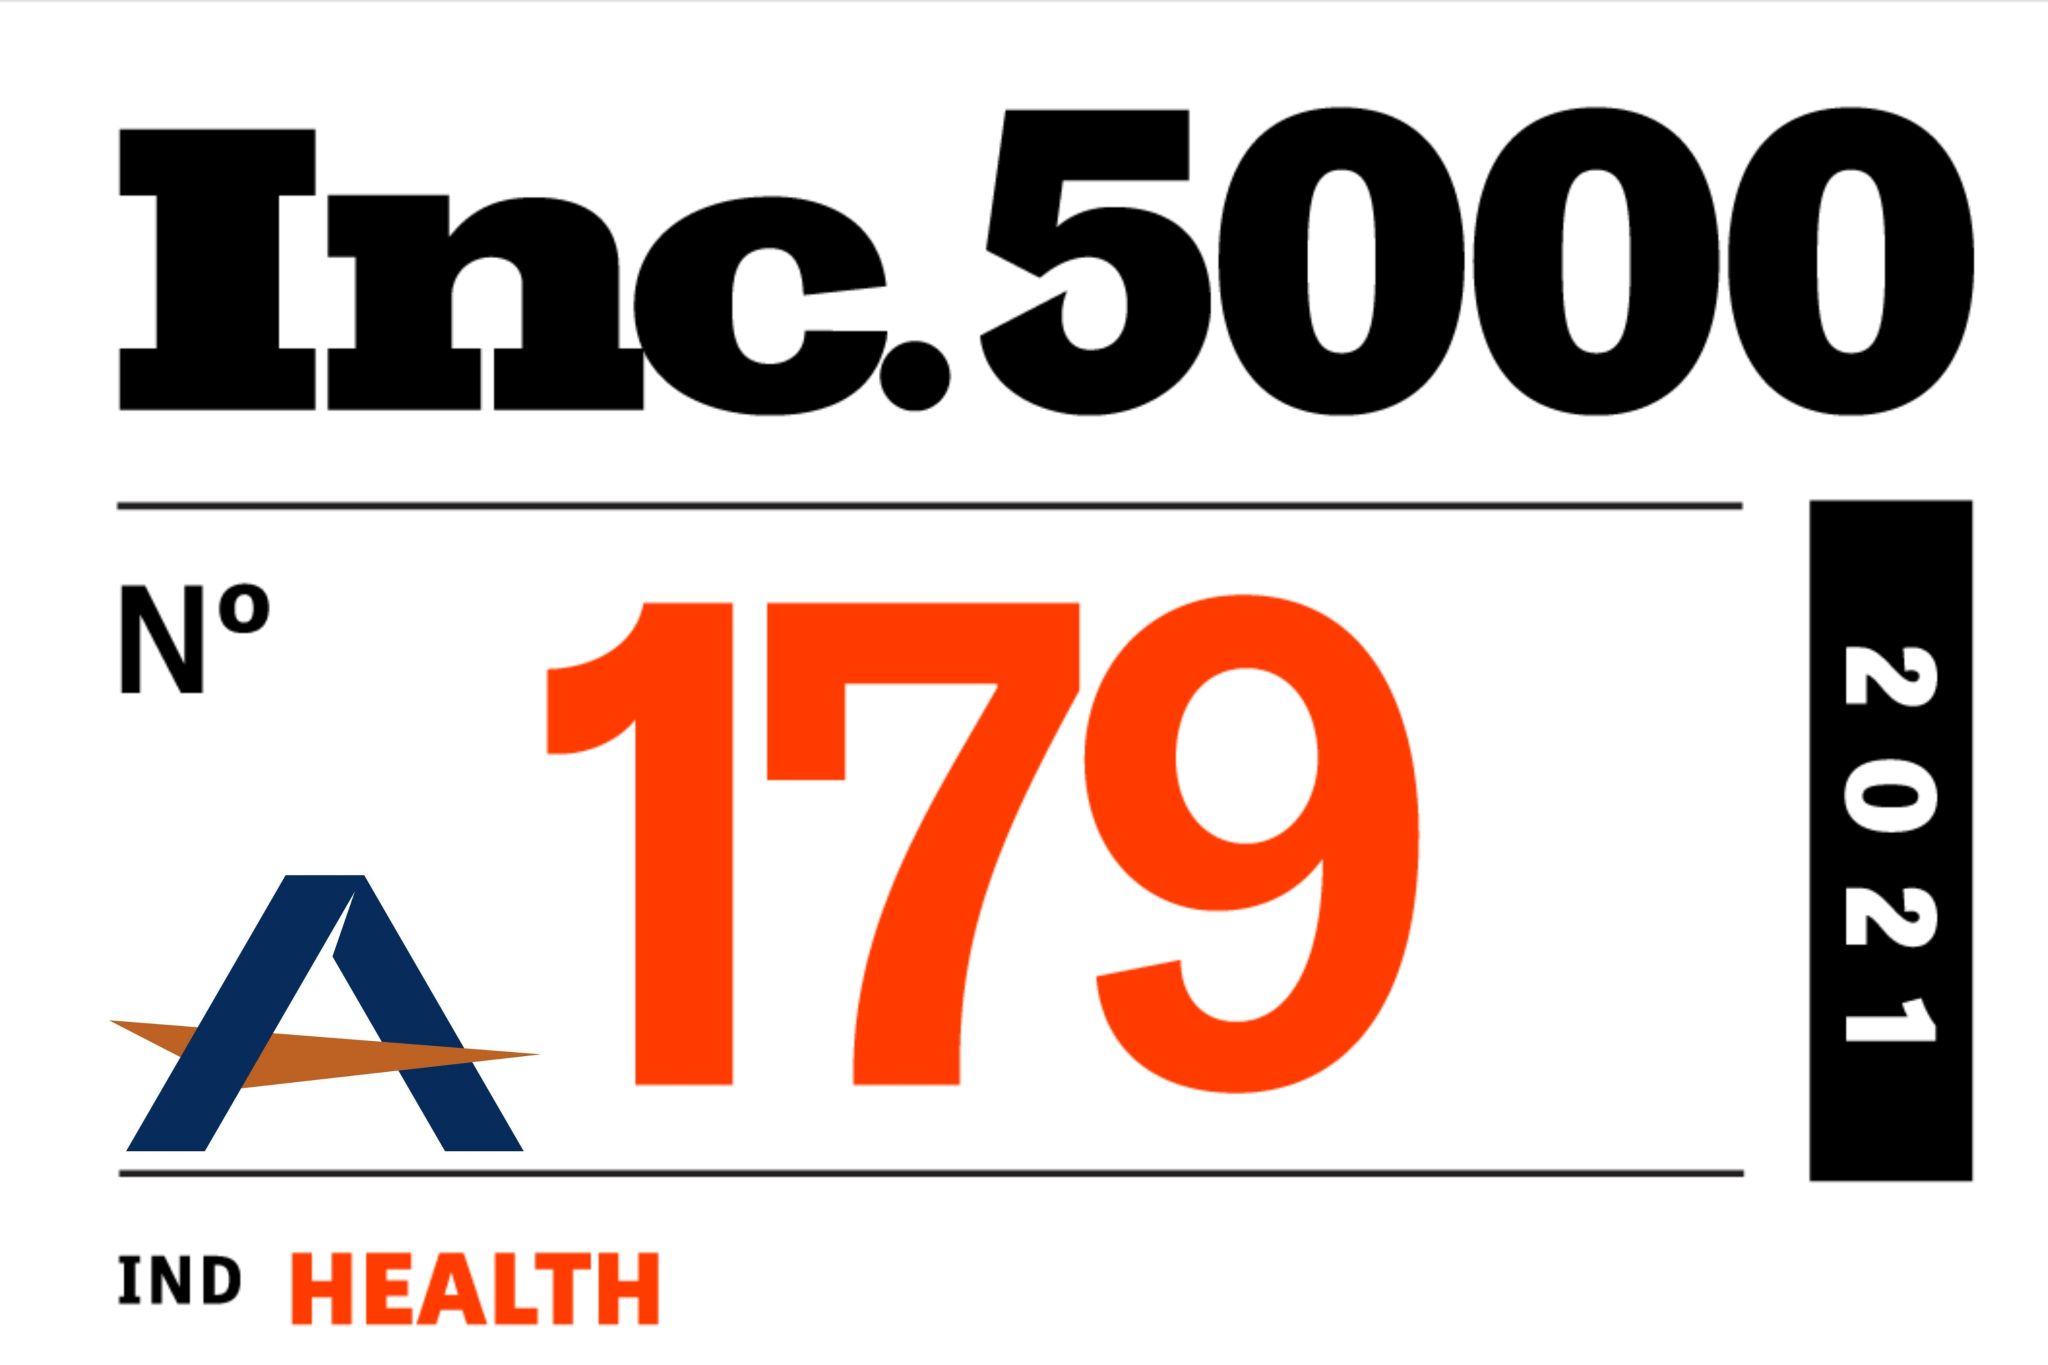 For the 3rd Time, Affinity Dental Management Appears on the Inc. 5000, Ranking No. 2095 with Three-Year Revenue Growth of 210 Percent